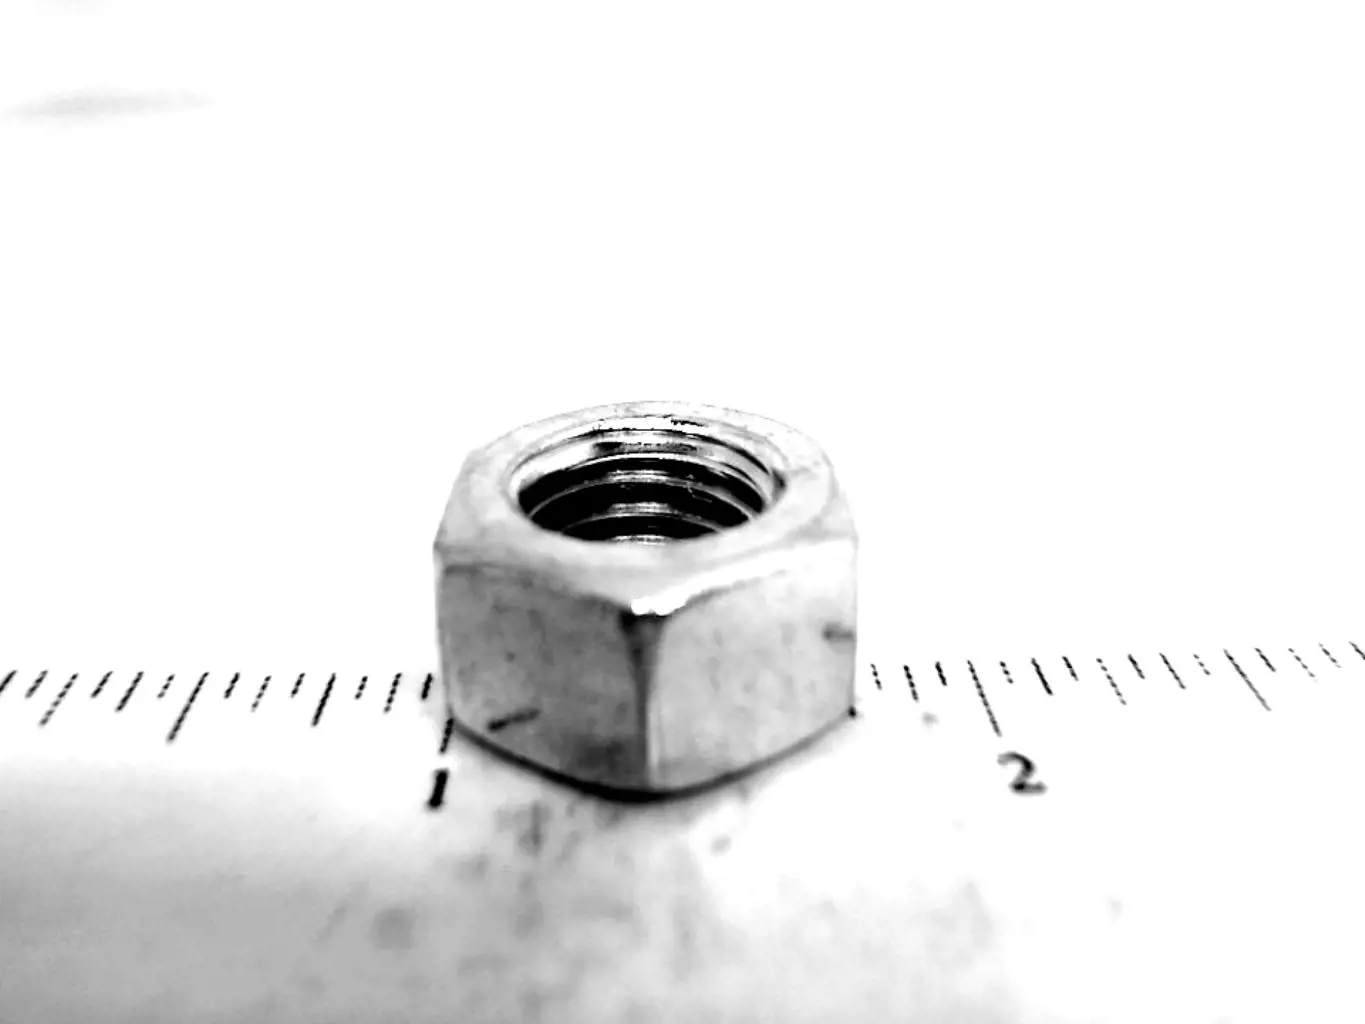 Image 1 for #280431 HEX NUT 1/2-13